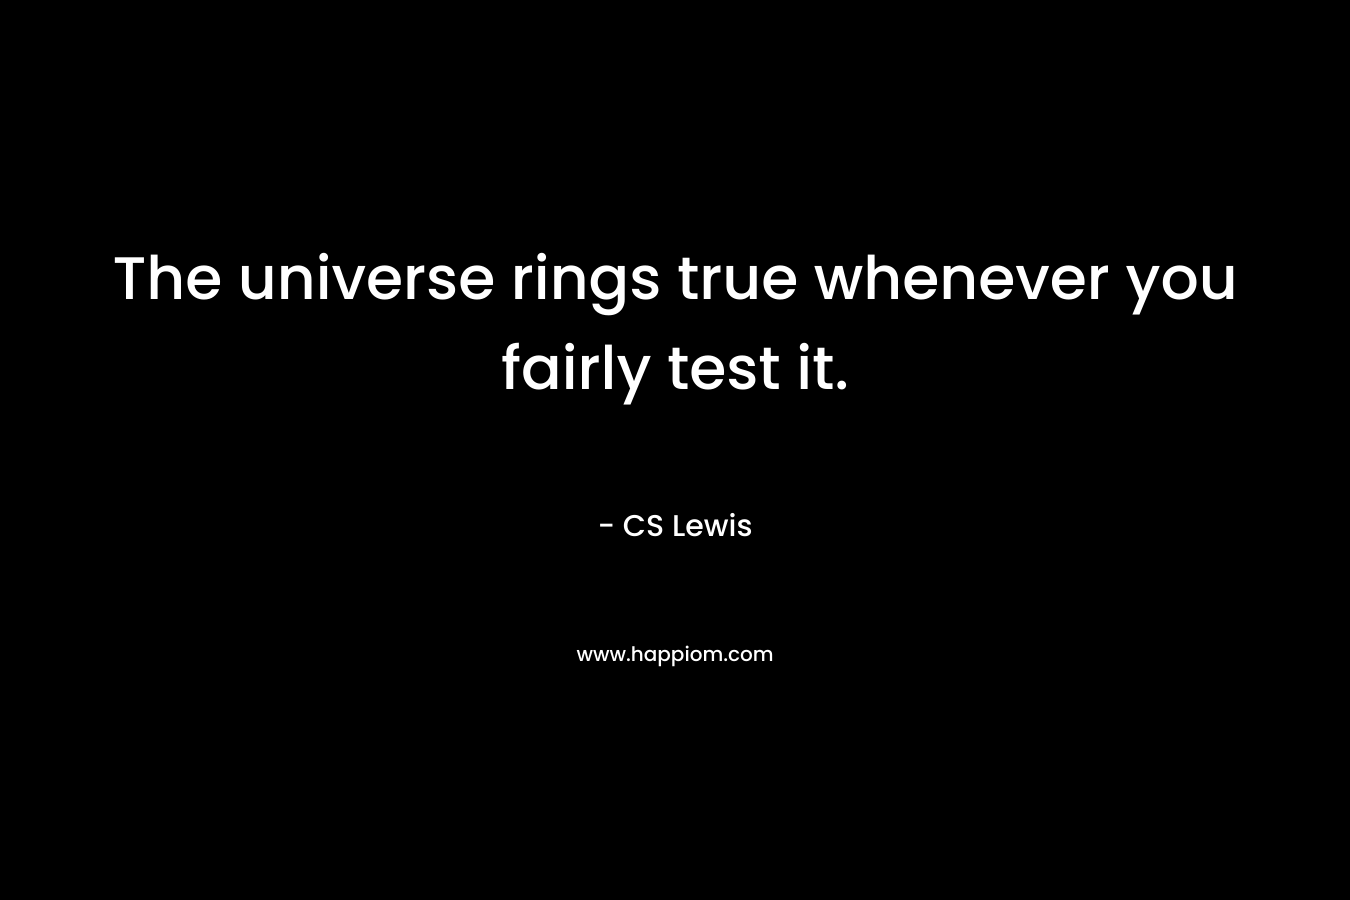 The universe rings true whenever you fairly test it.